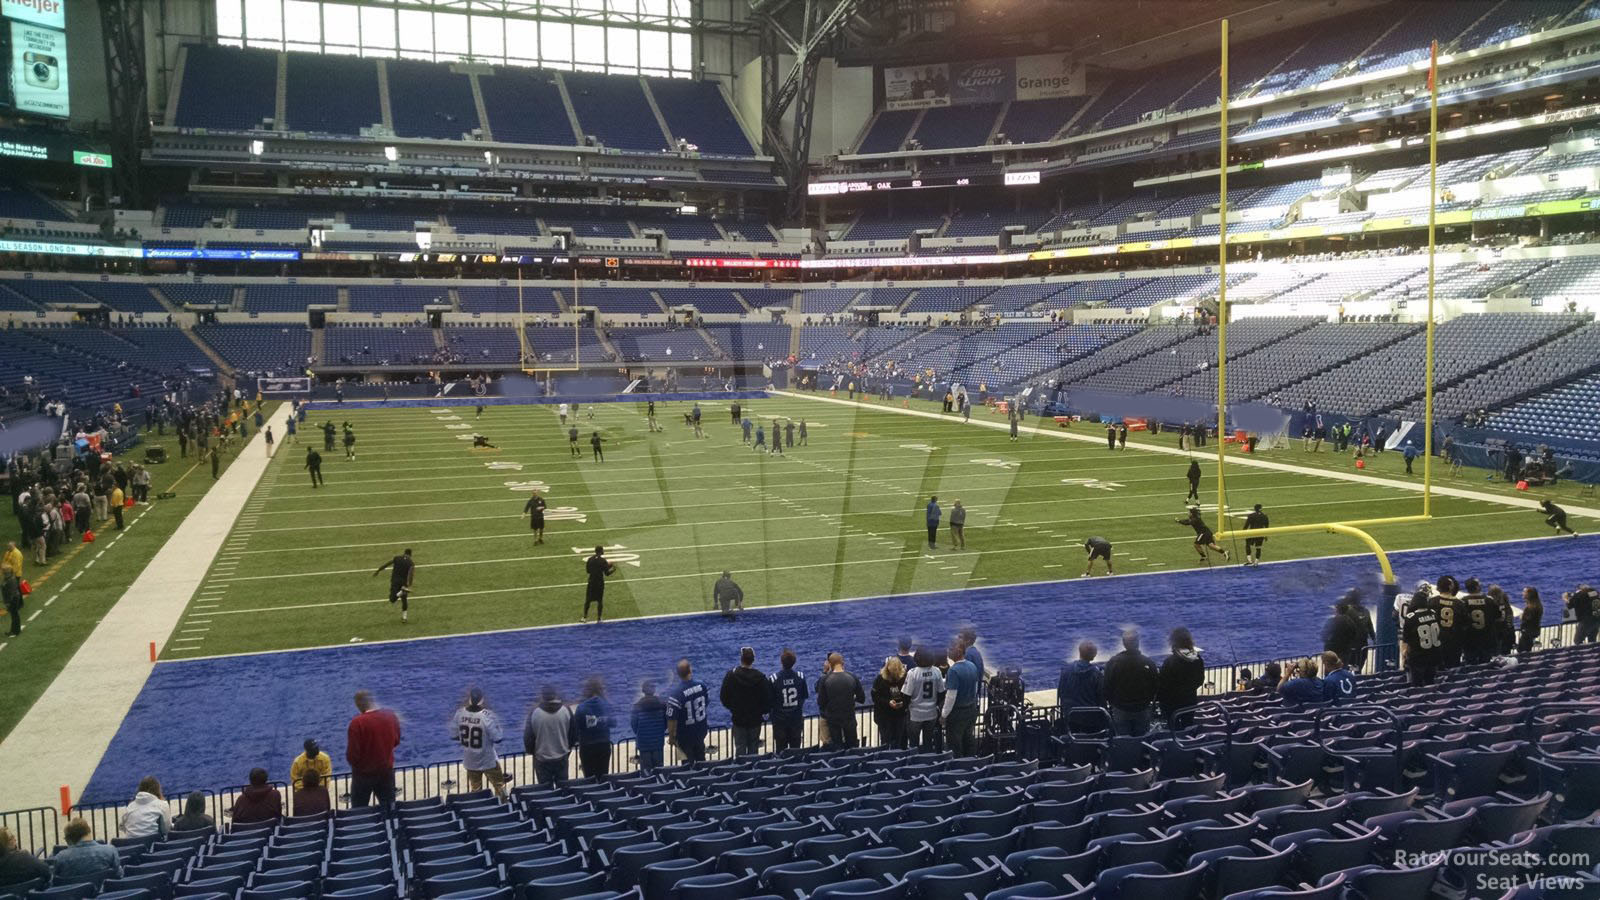 section 102, row 20 seat view  for football - lucas oil stadium